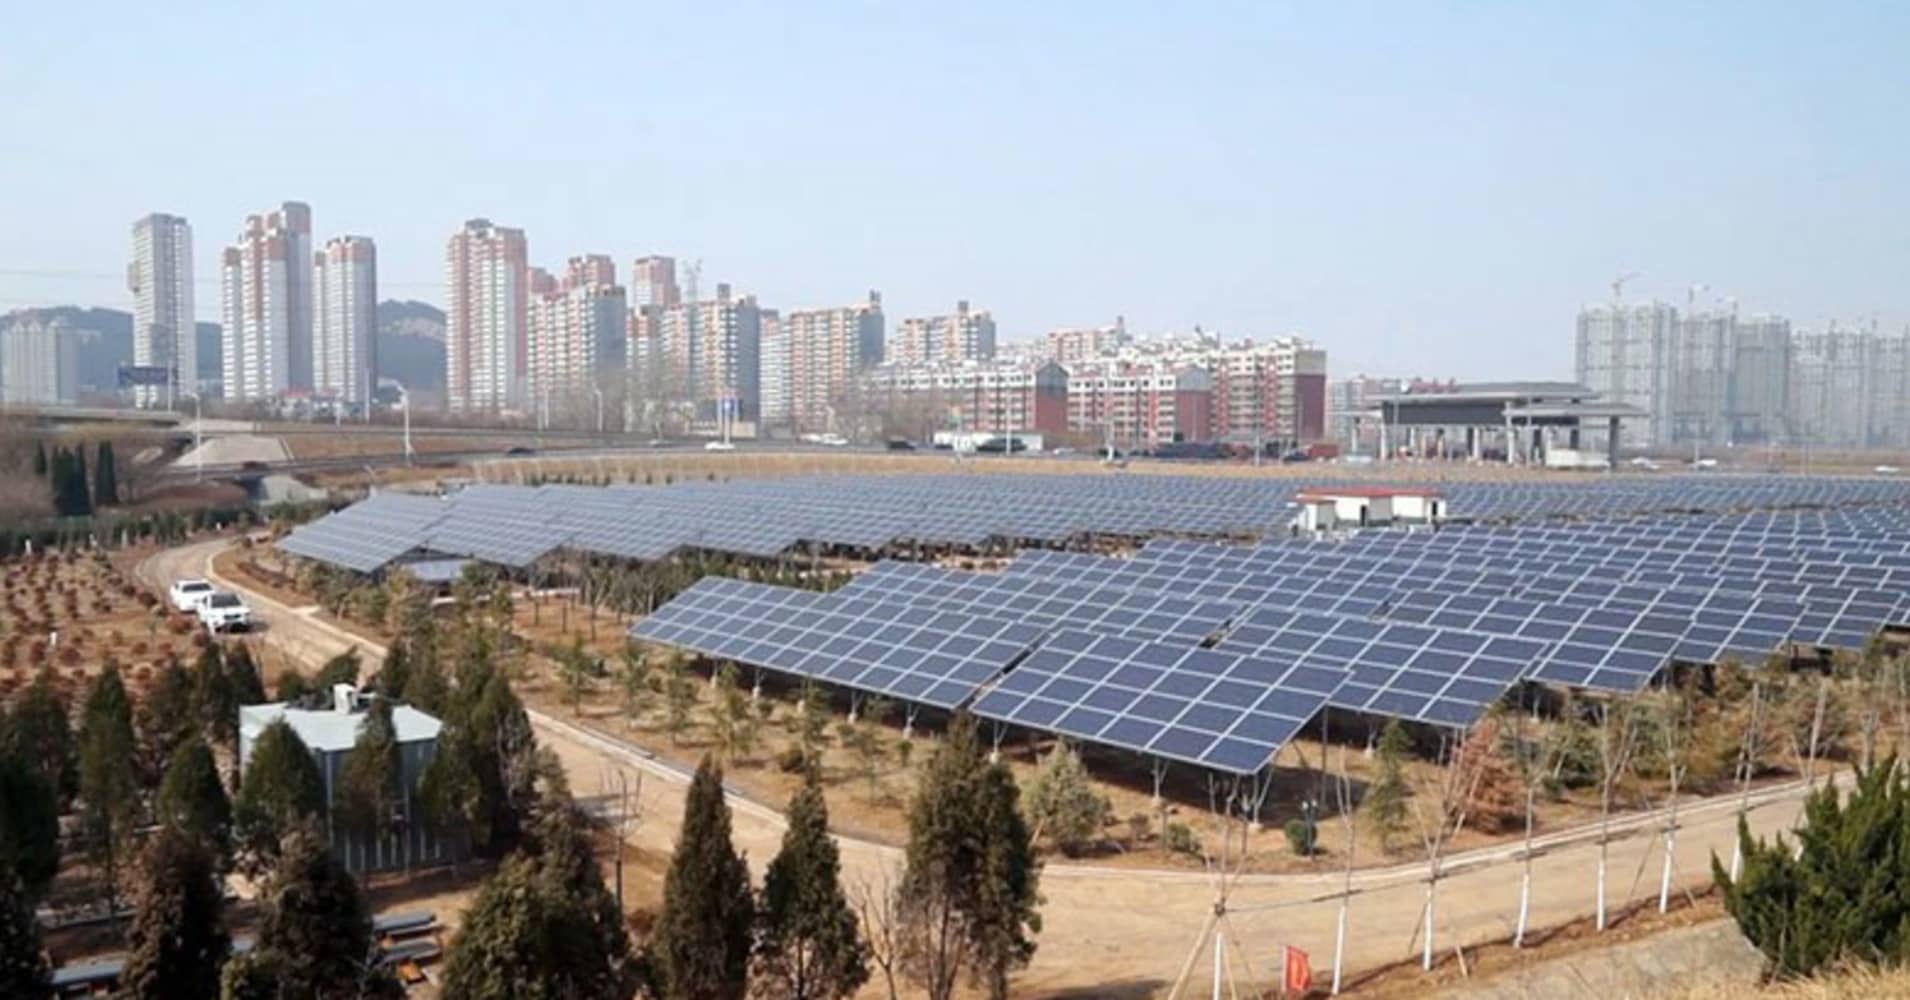 105669377 1547073708166solar park at a highway roundabout in jinan the capital of shandong